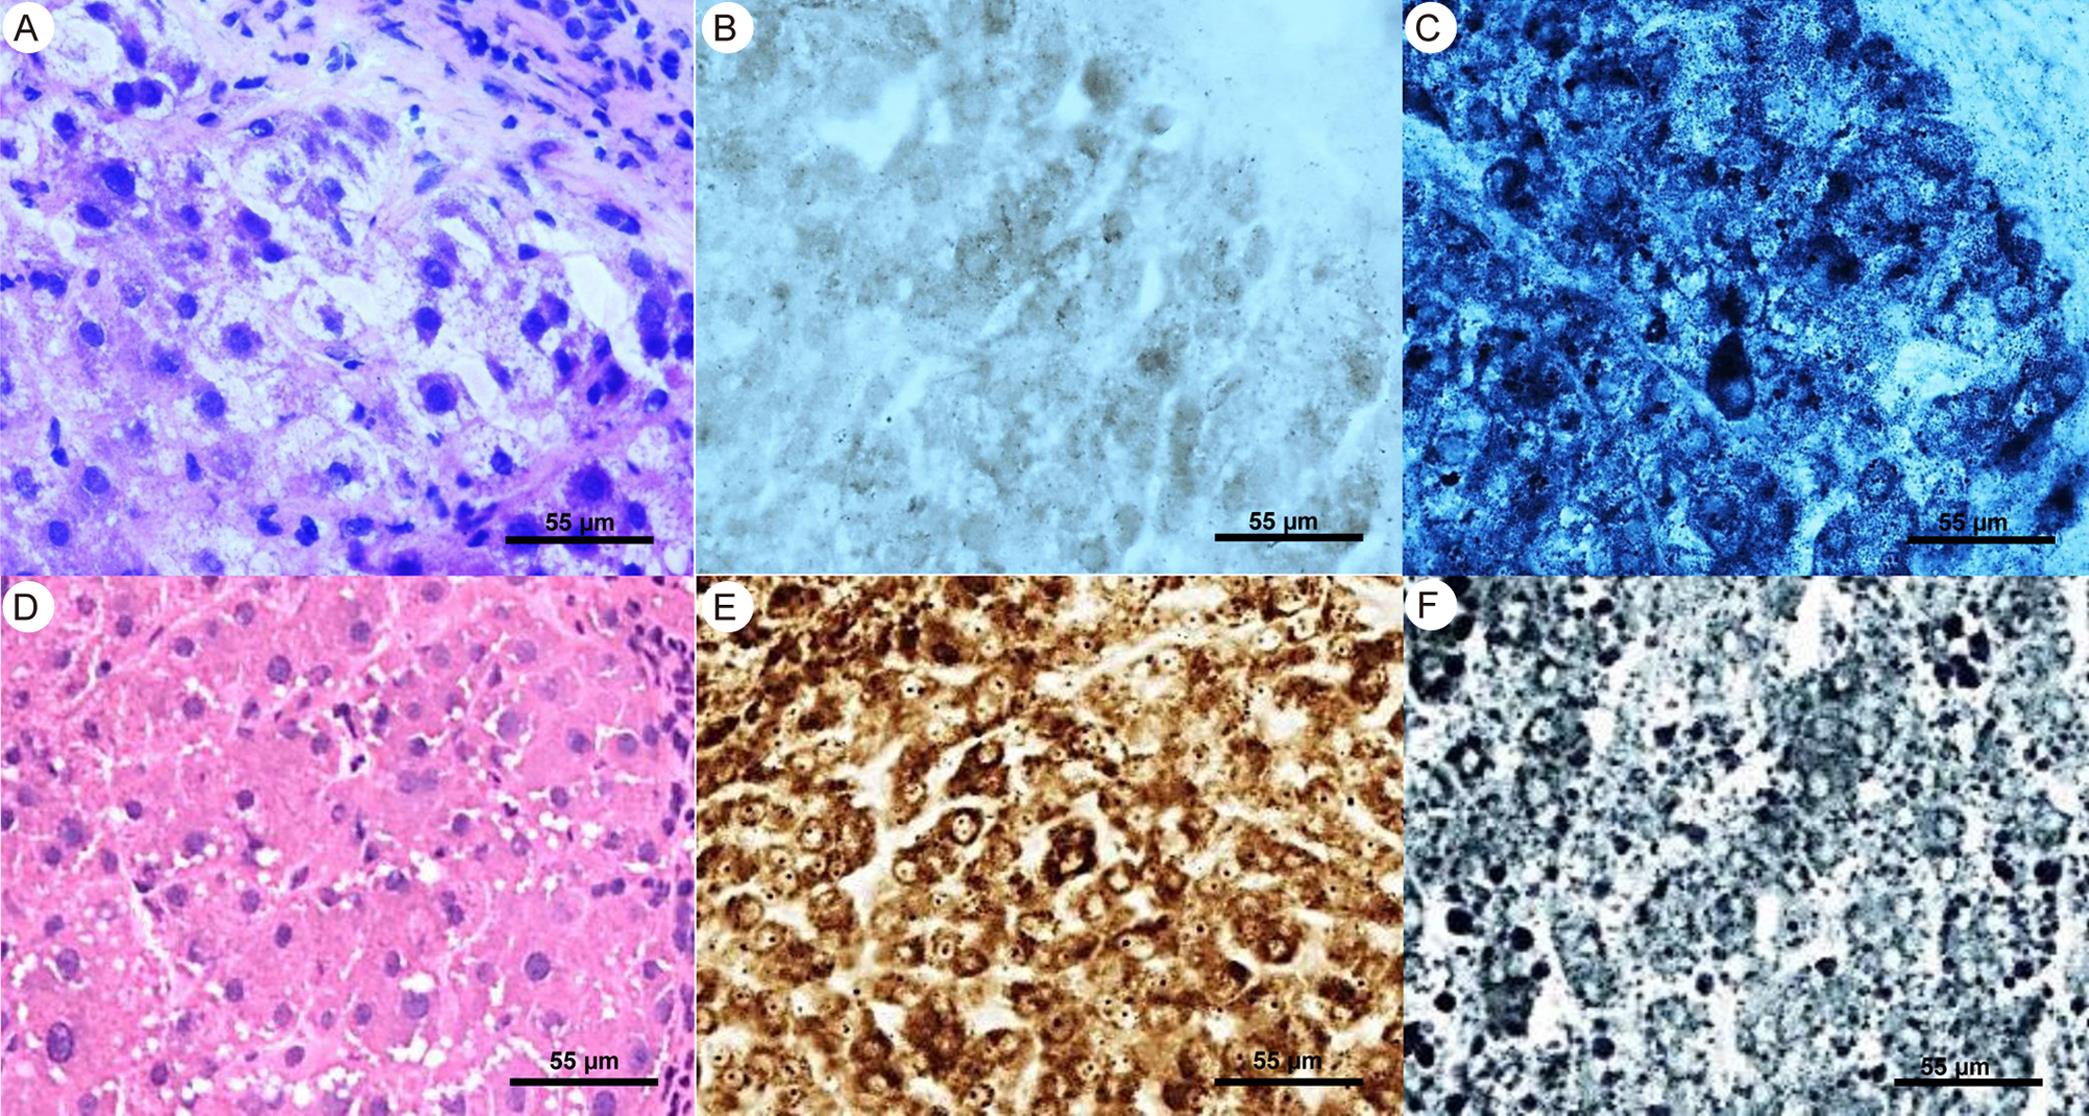 Serial cryostat sections of cryptogenic cirrhotic liver and normal liver specimens comparing histological and enzyme histochemical properties.